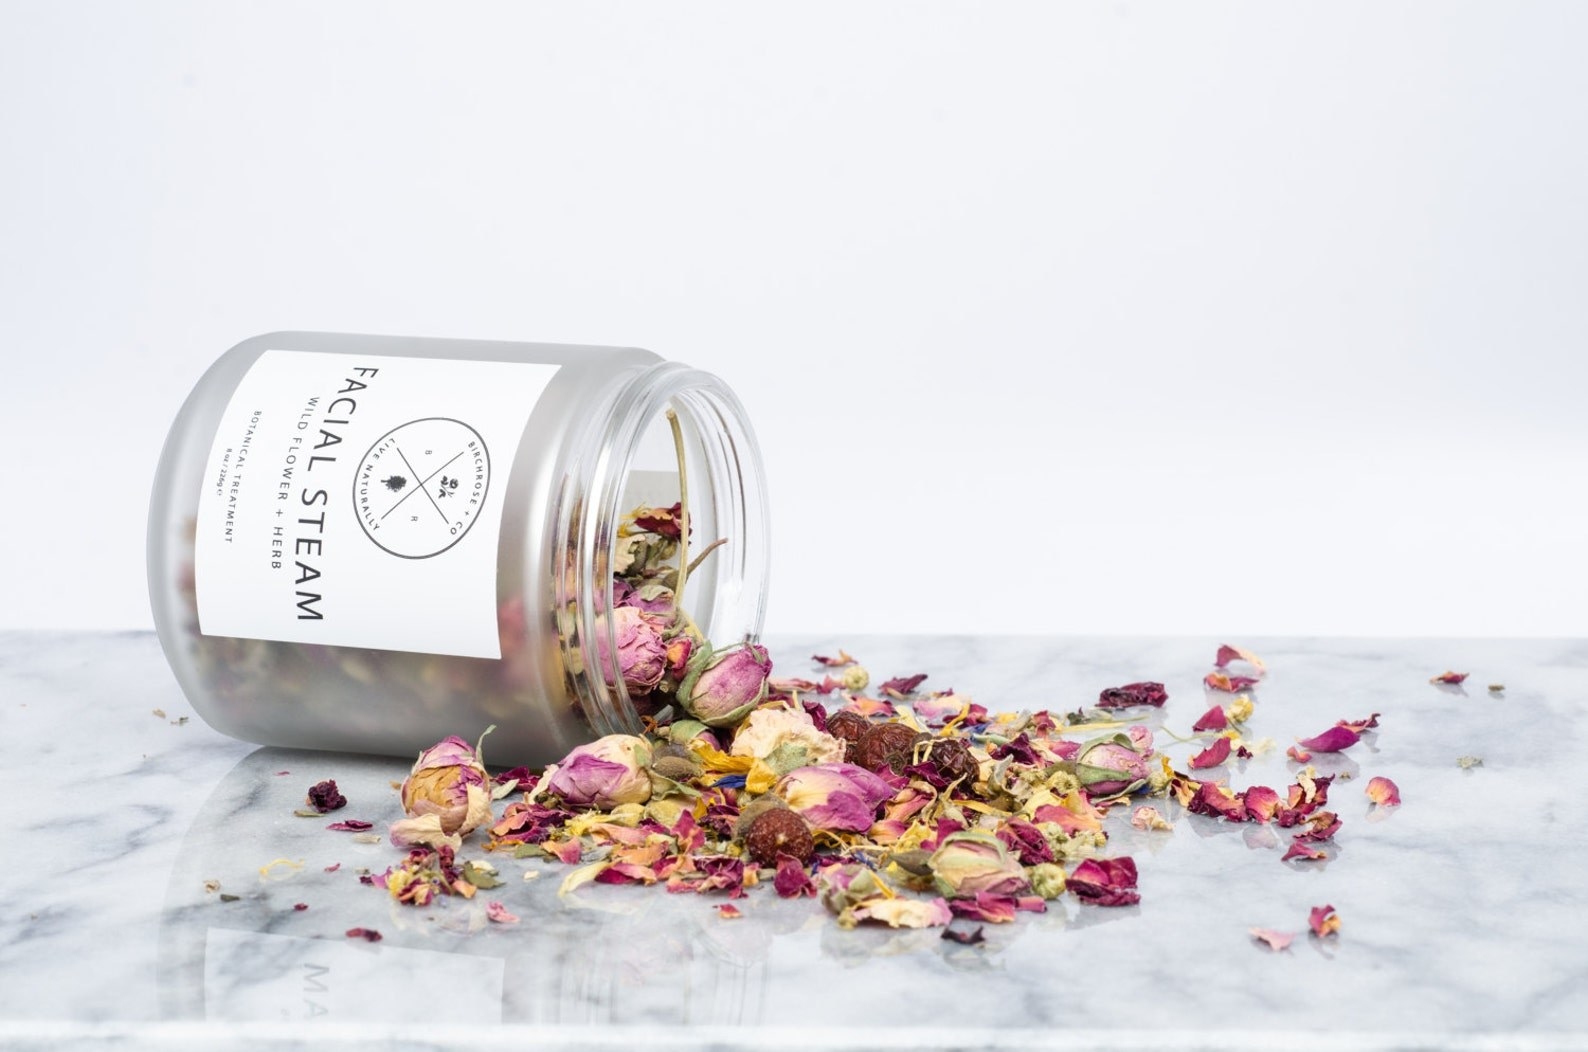 A jar of the facial steam knocked over with all the dried flowers spilled over